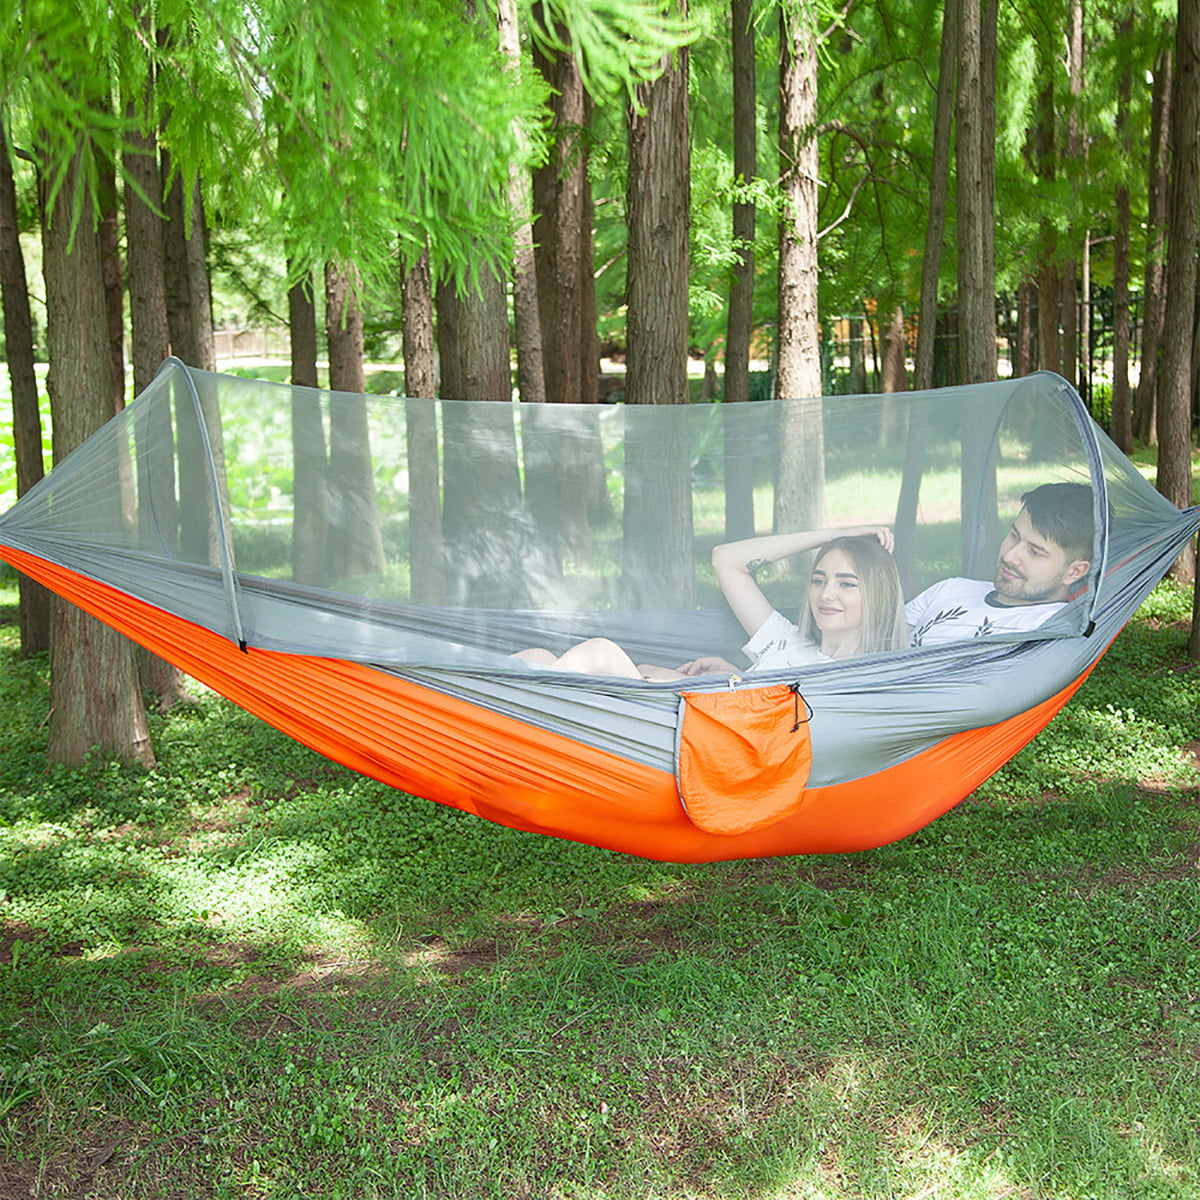 Double Camping Hammock 2 Two Person Outdoor Parachute Tent Travel Hanging Nest 